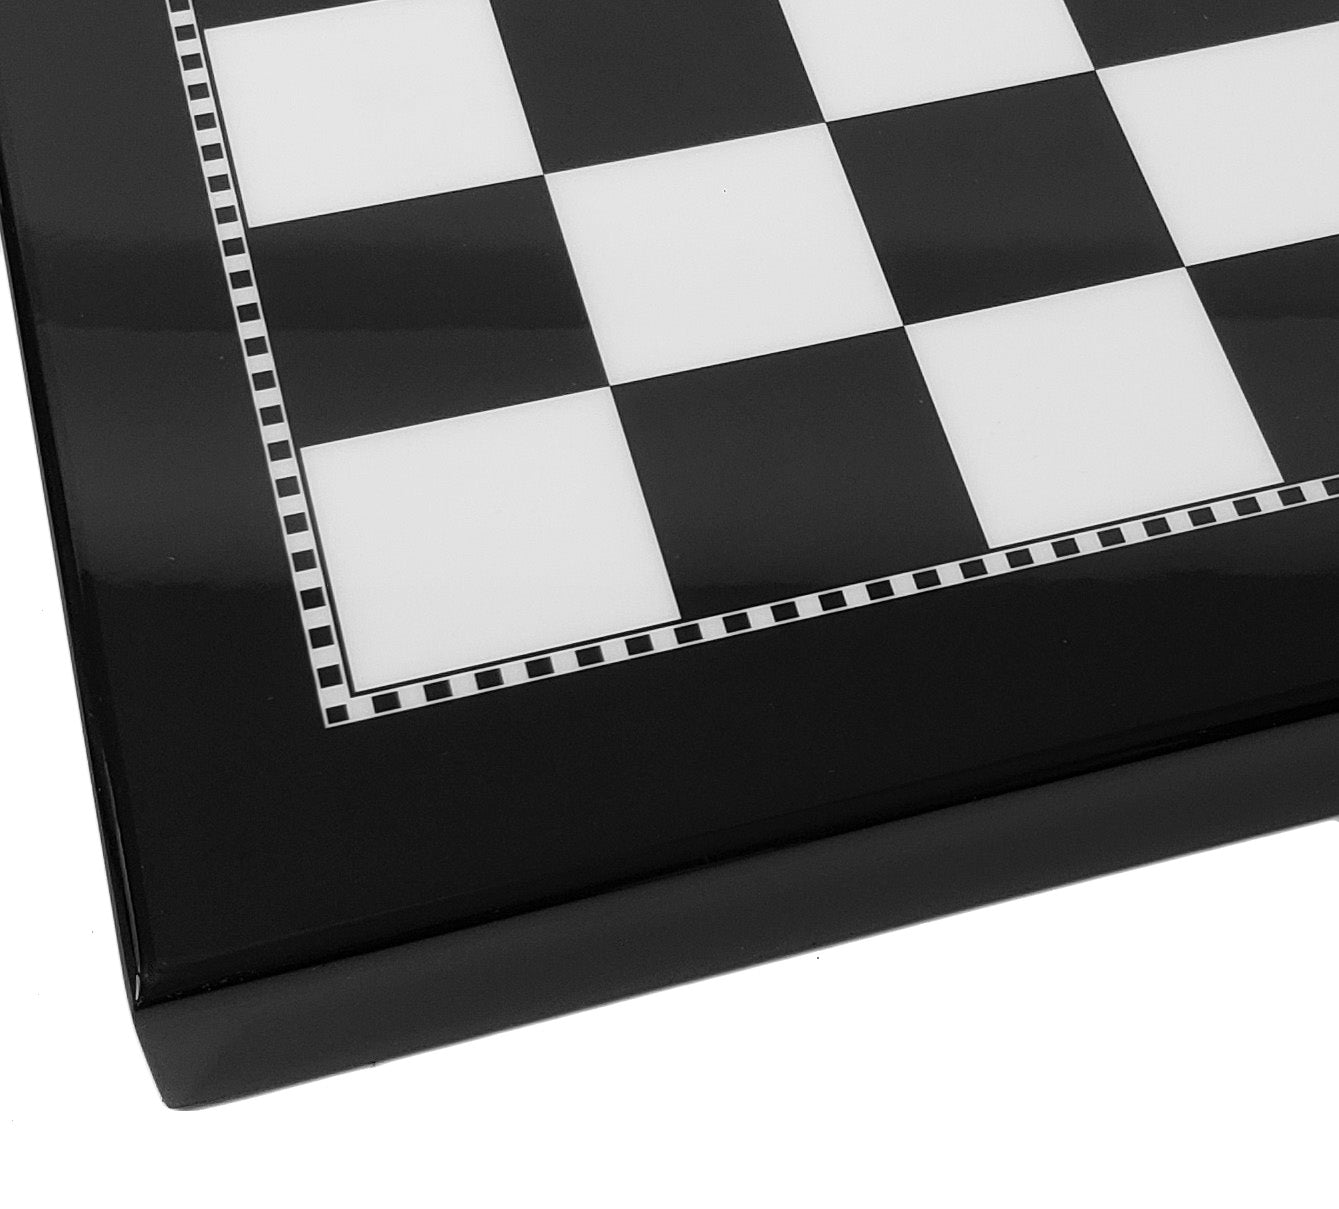 15" High Gloss Black and White Chess Board 1.59" Squares